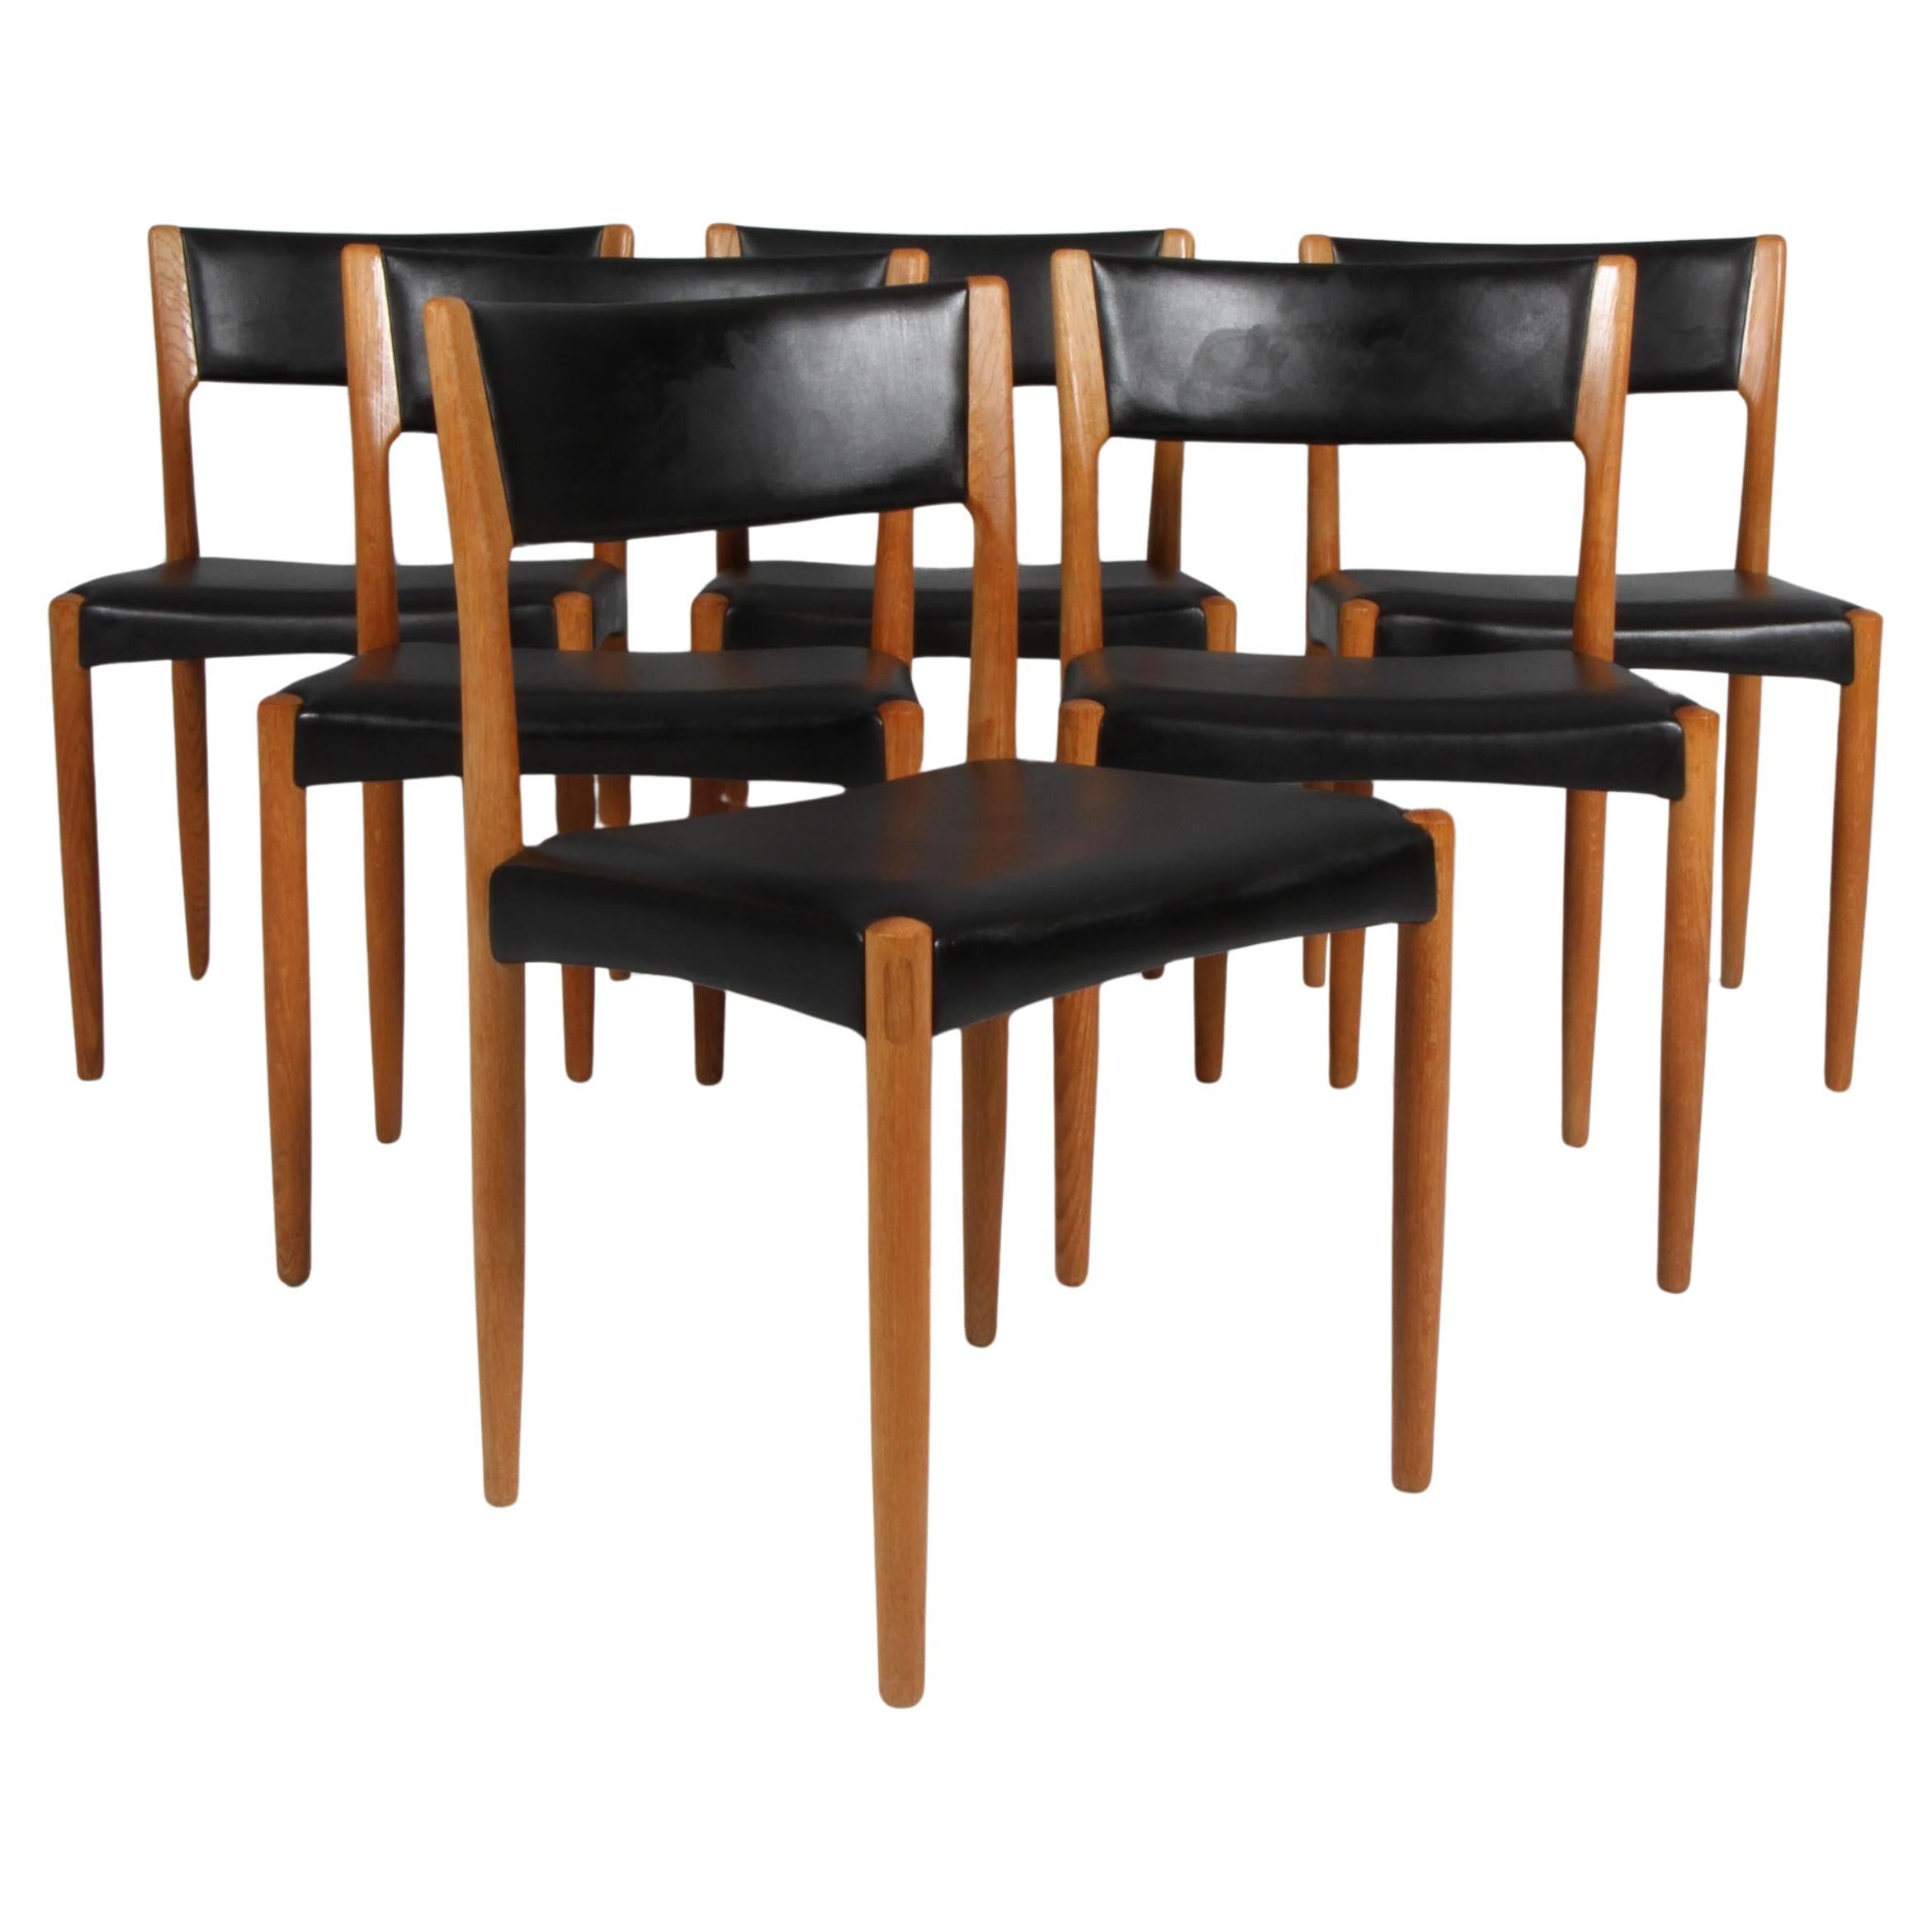 Harry Ostergaard, Set of Dining Chairs, oak and leather